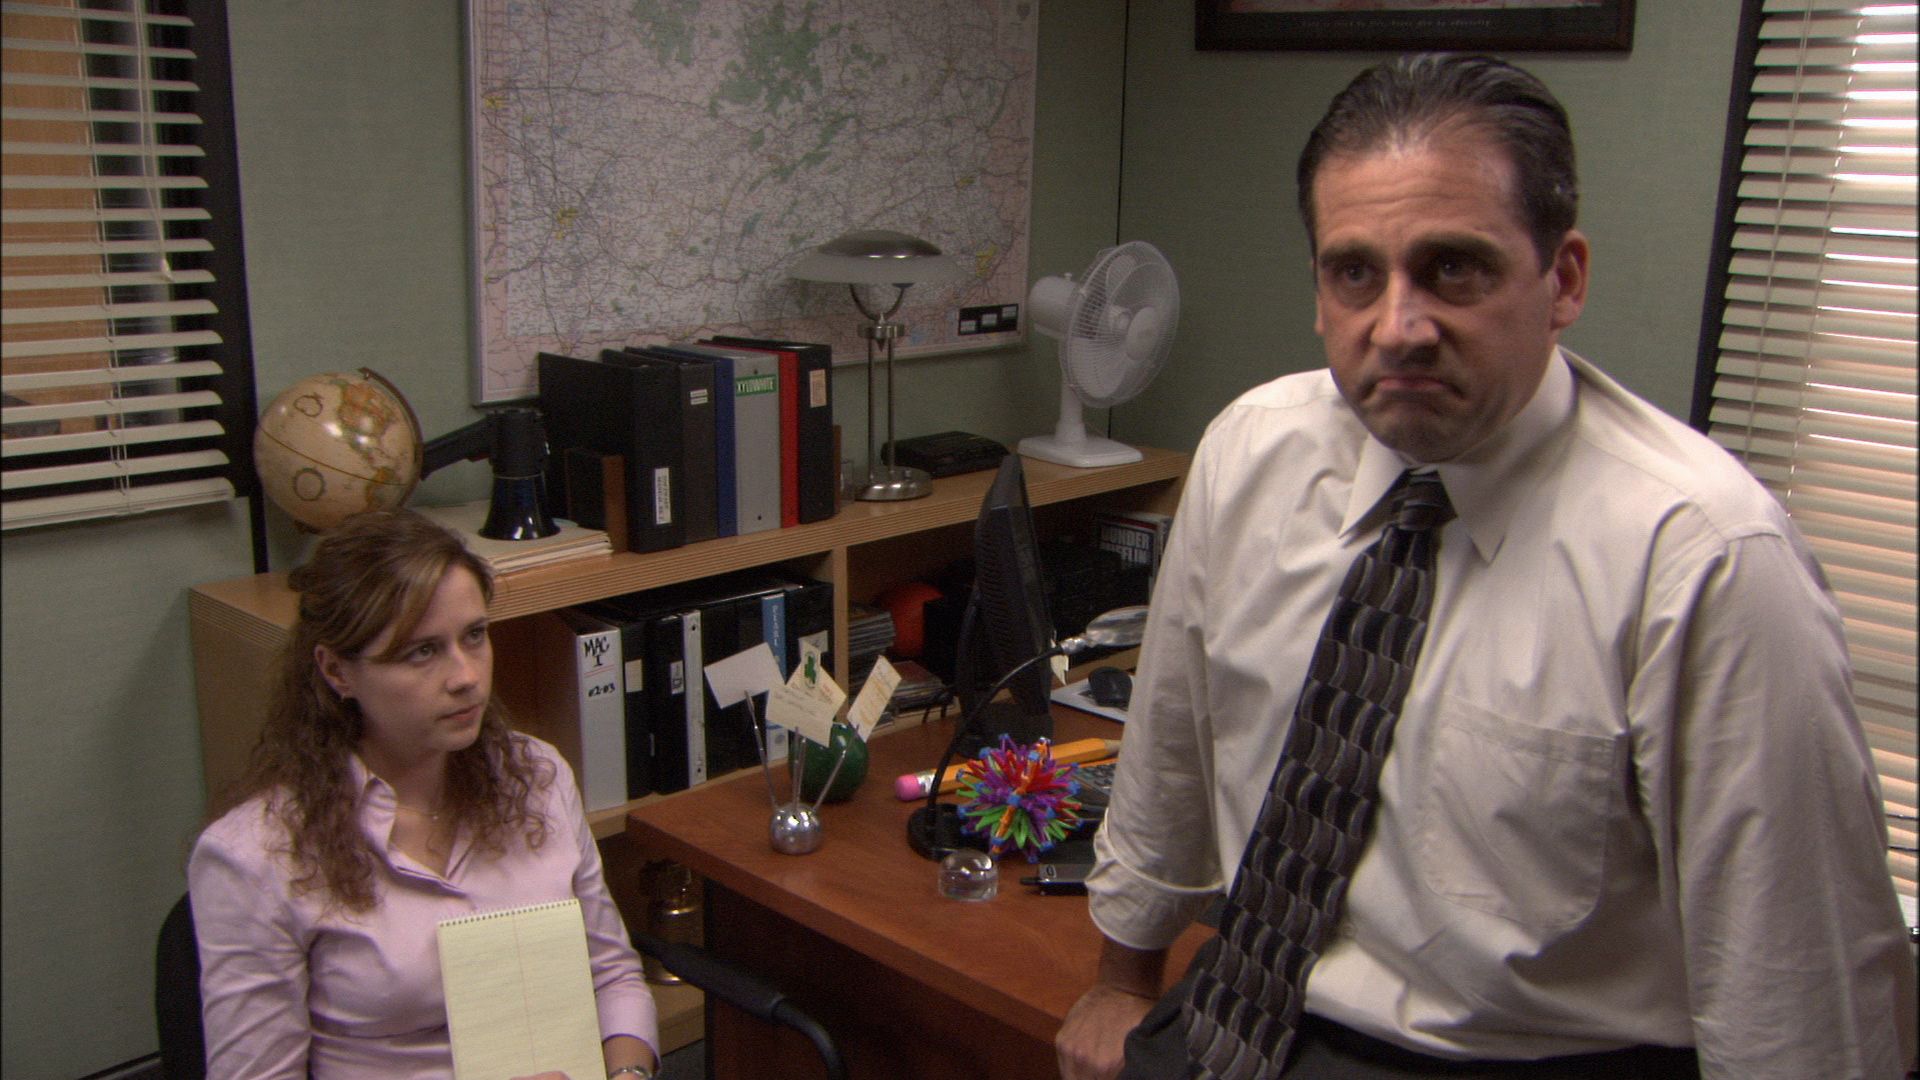 Is The Office Scripted or Real?